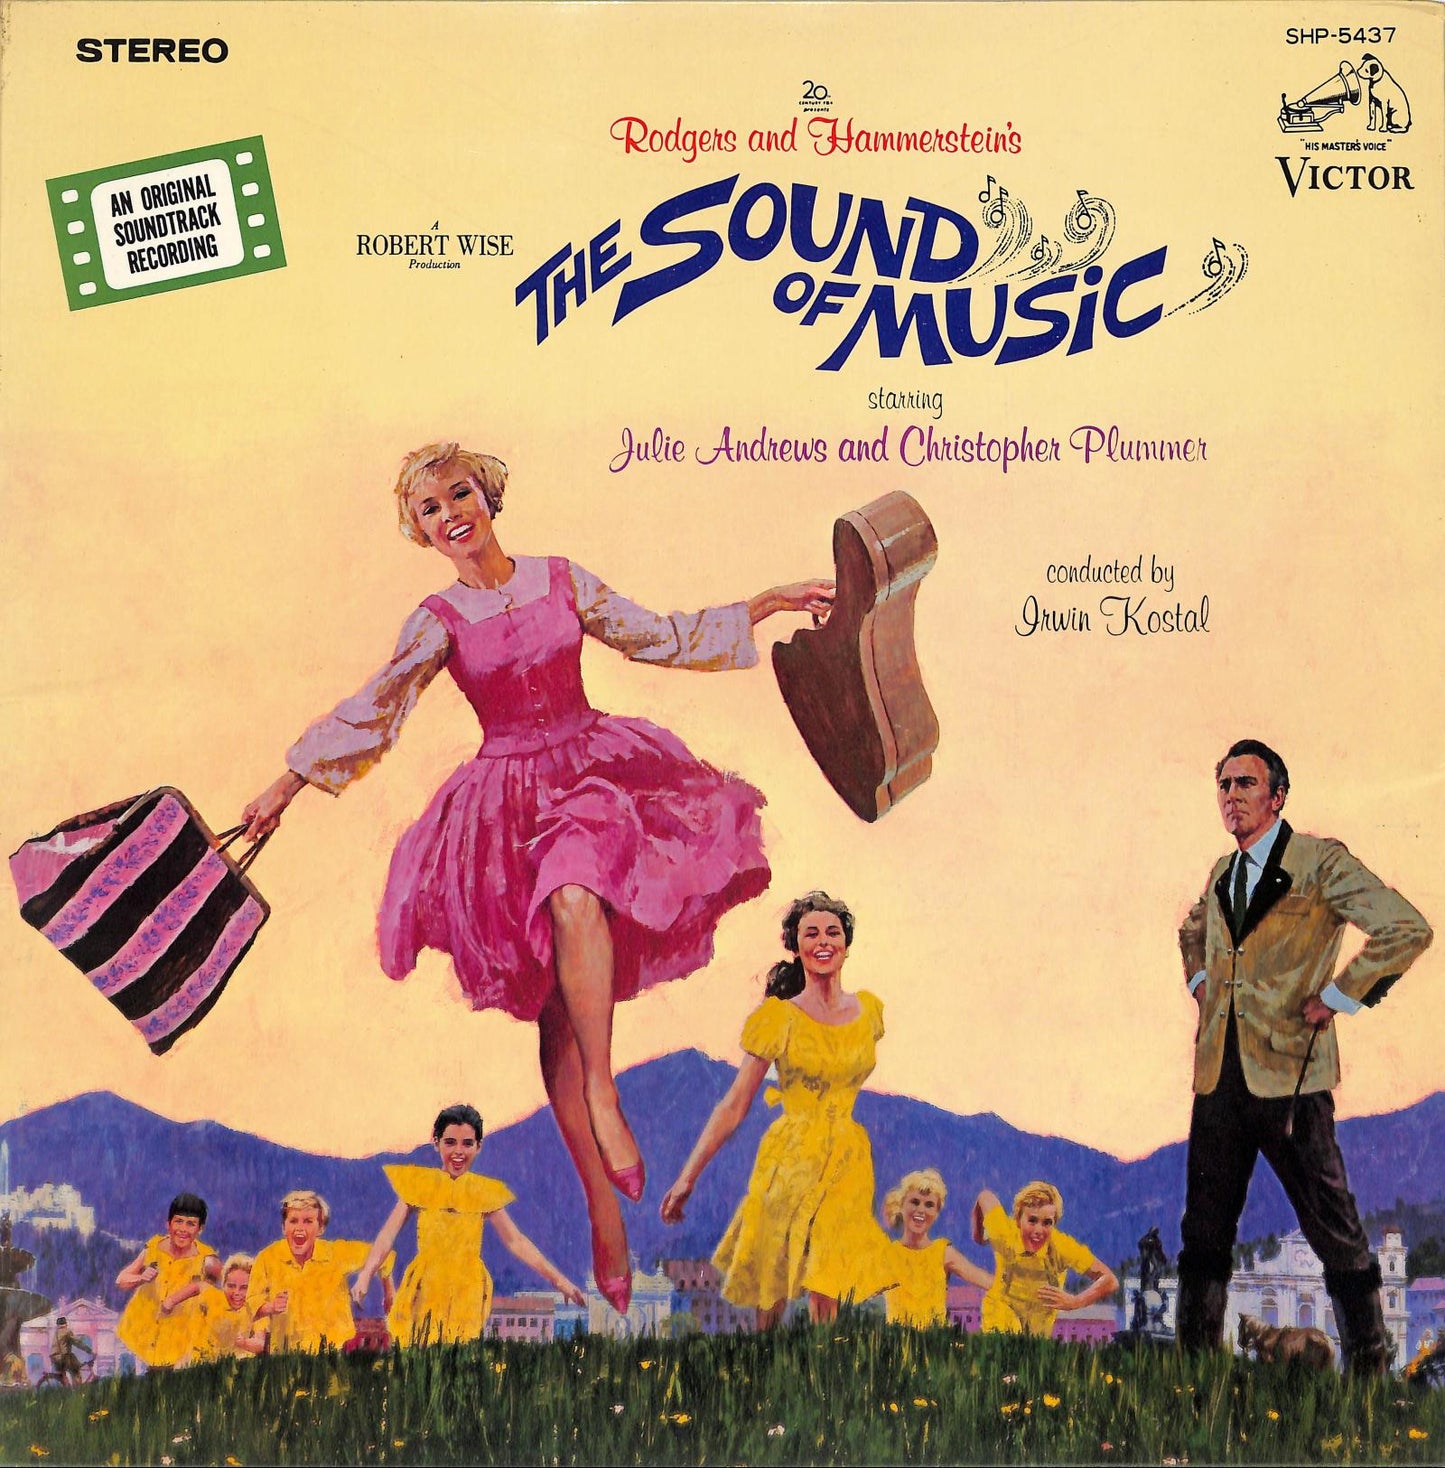 RODGERS AND HAMMERSTEIN / JULIE ANDREWS, CHRISTOPHER PLUMMER, IRWIN KOSTAL – The Sound Of Music (An Original Soundtrack Recording)